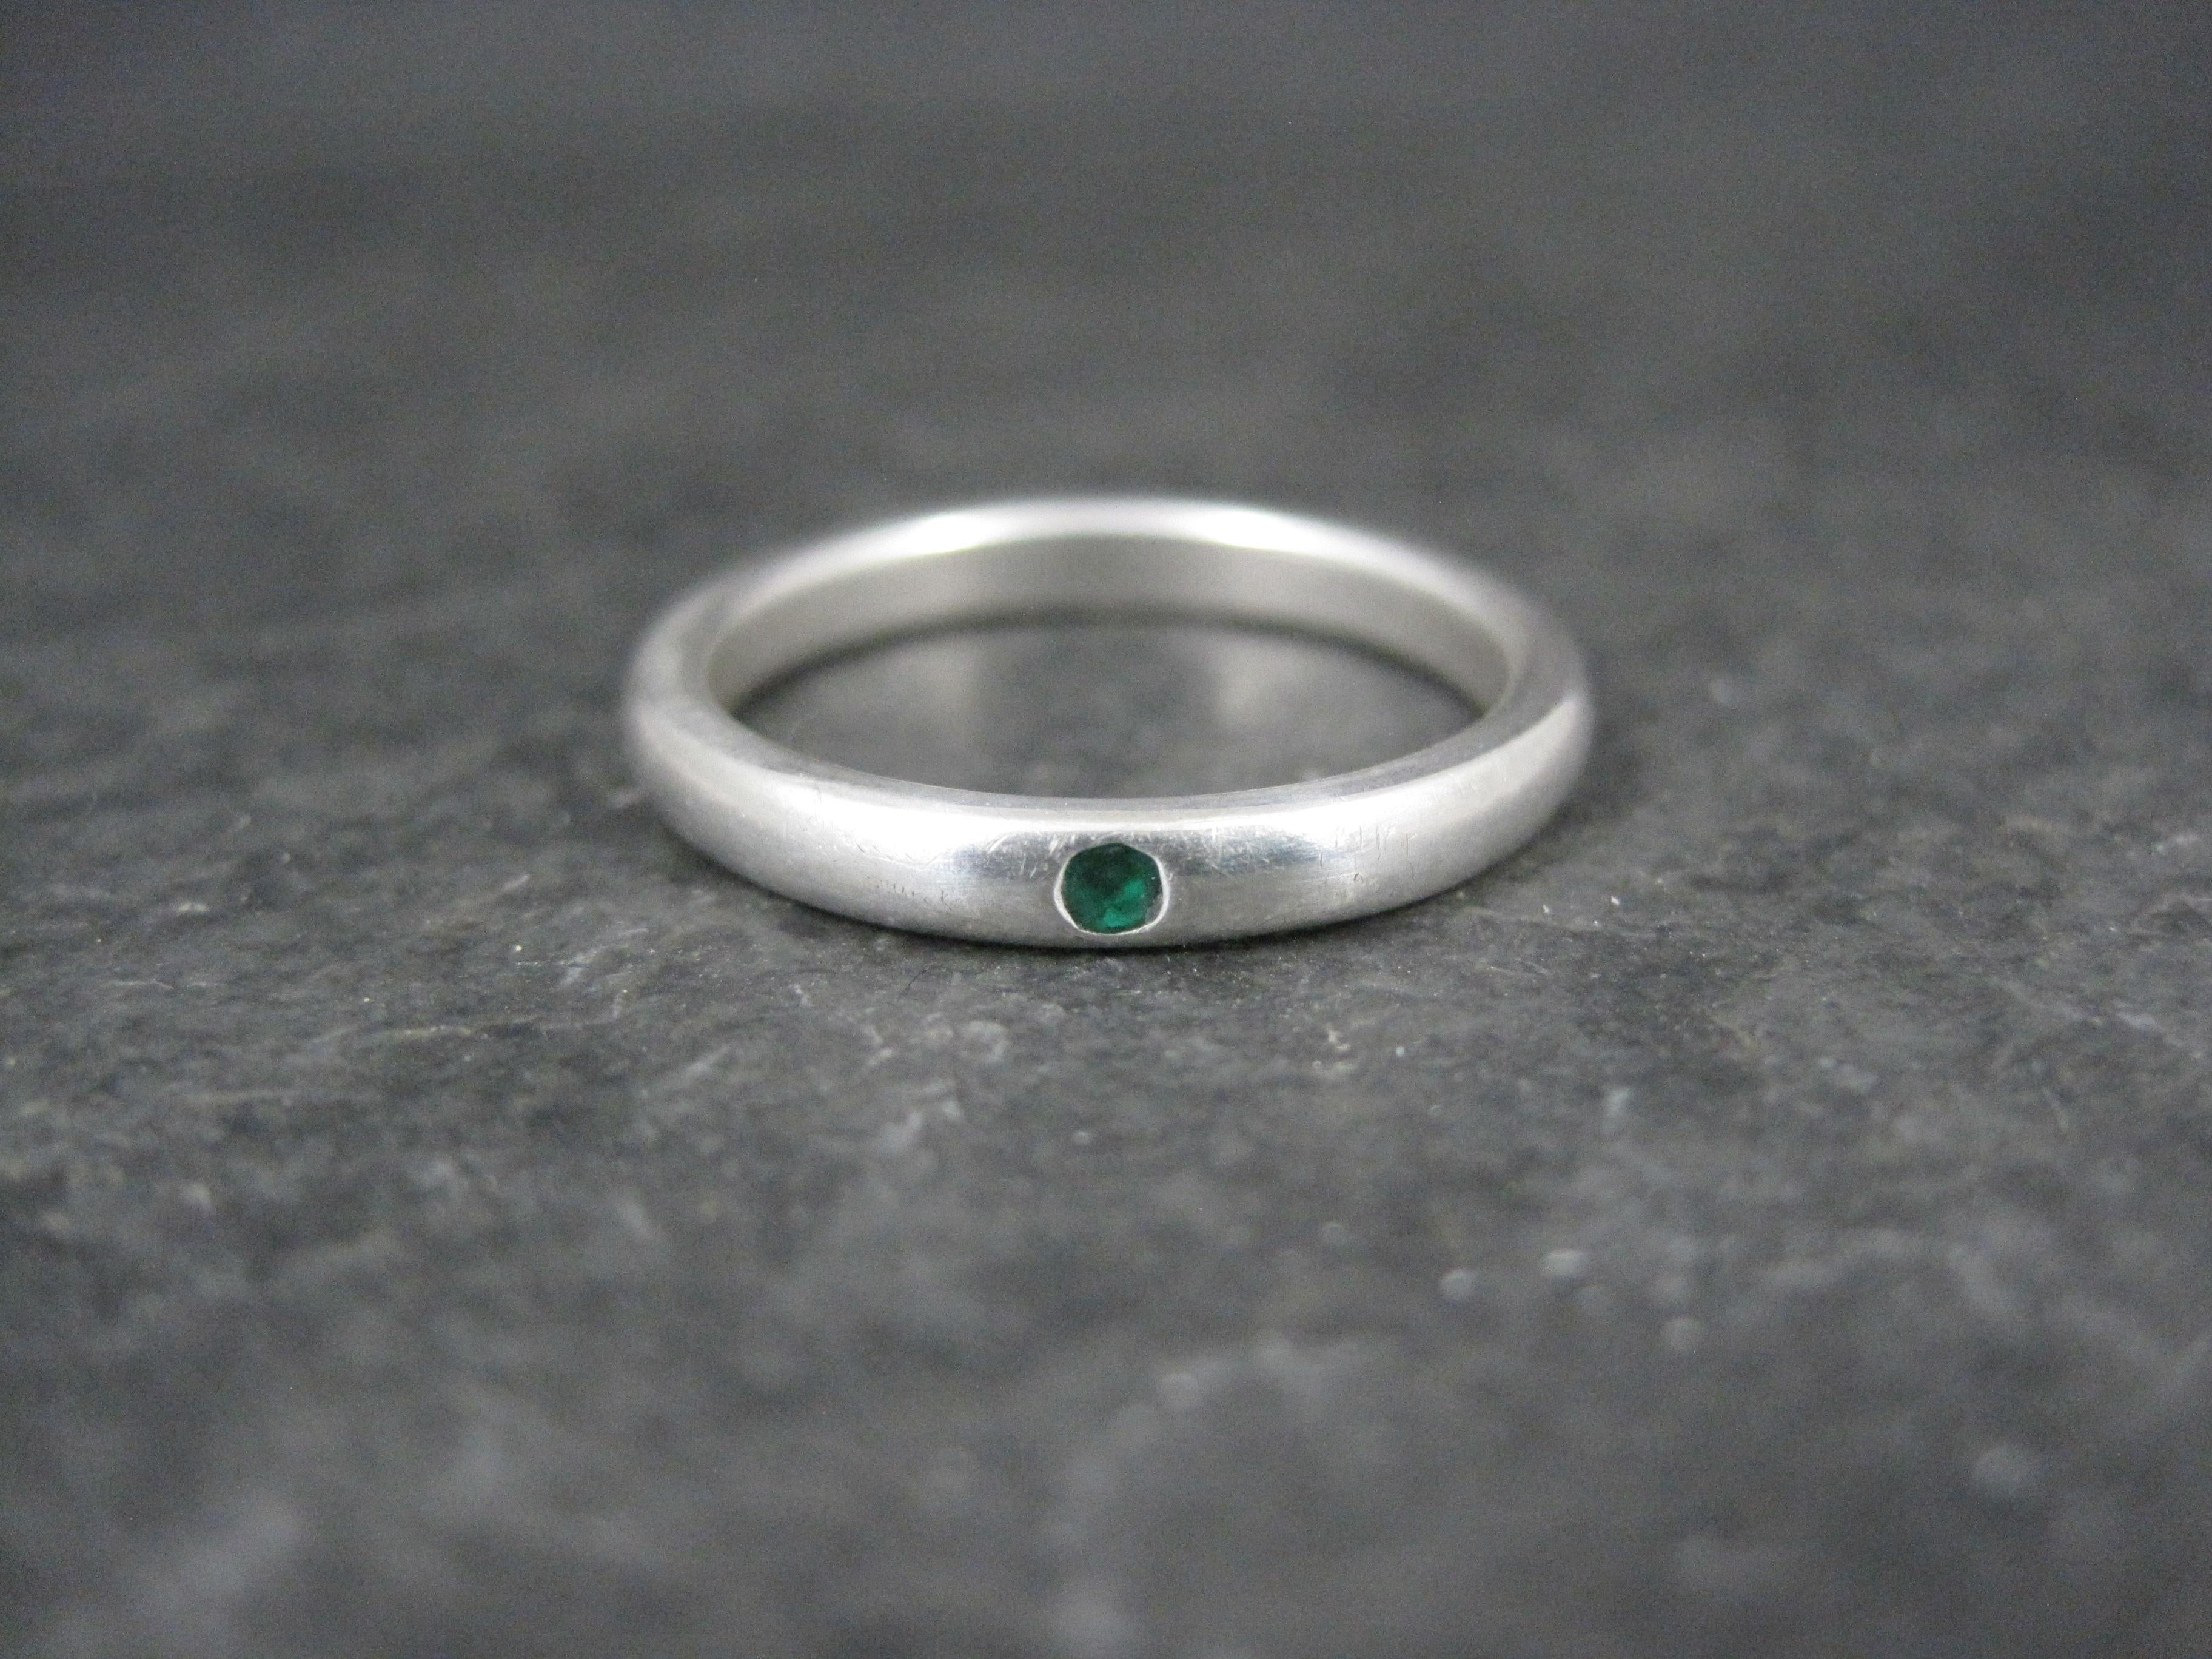 This beautiful band ring is a product of Elsa Peretti for Tiffany & Co.
It is sterling silver with a genuine emerald.

Measurements: 2.5mm wide
Size: 6 1/2

Marks: Tiffany & Co, 925, Peretti

Condition: Excellent